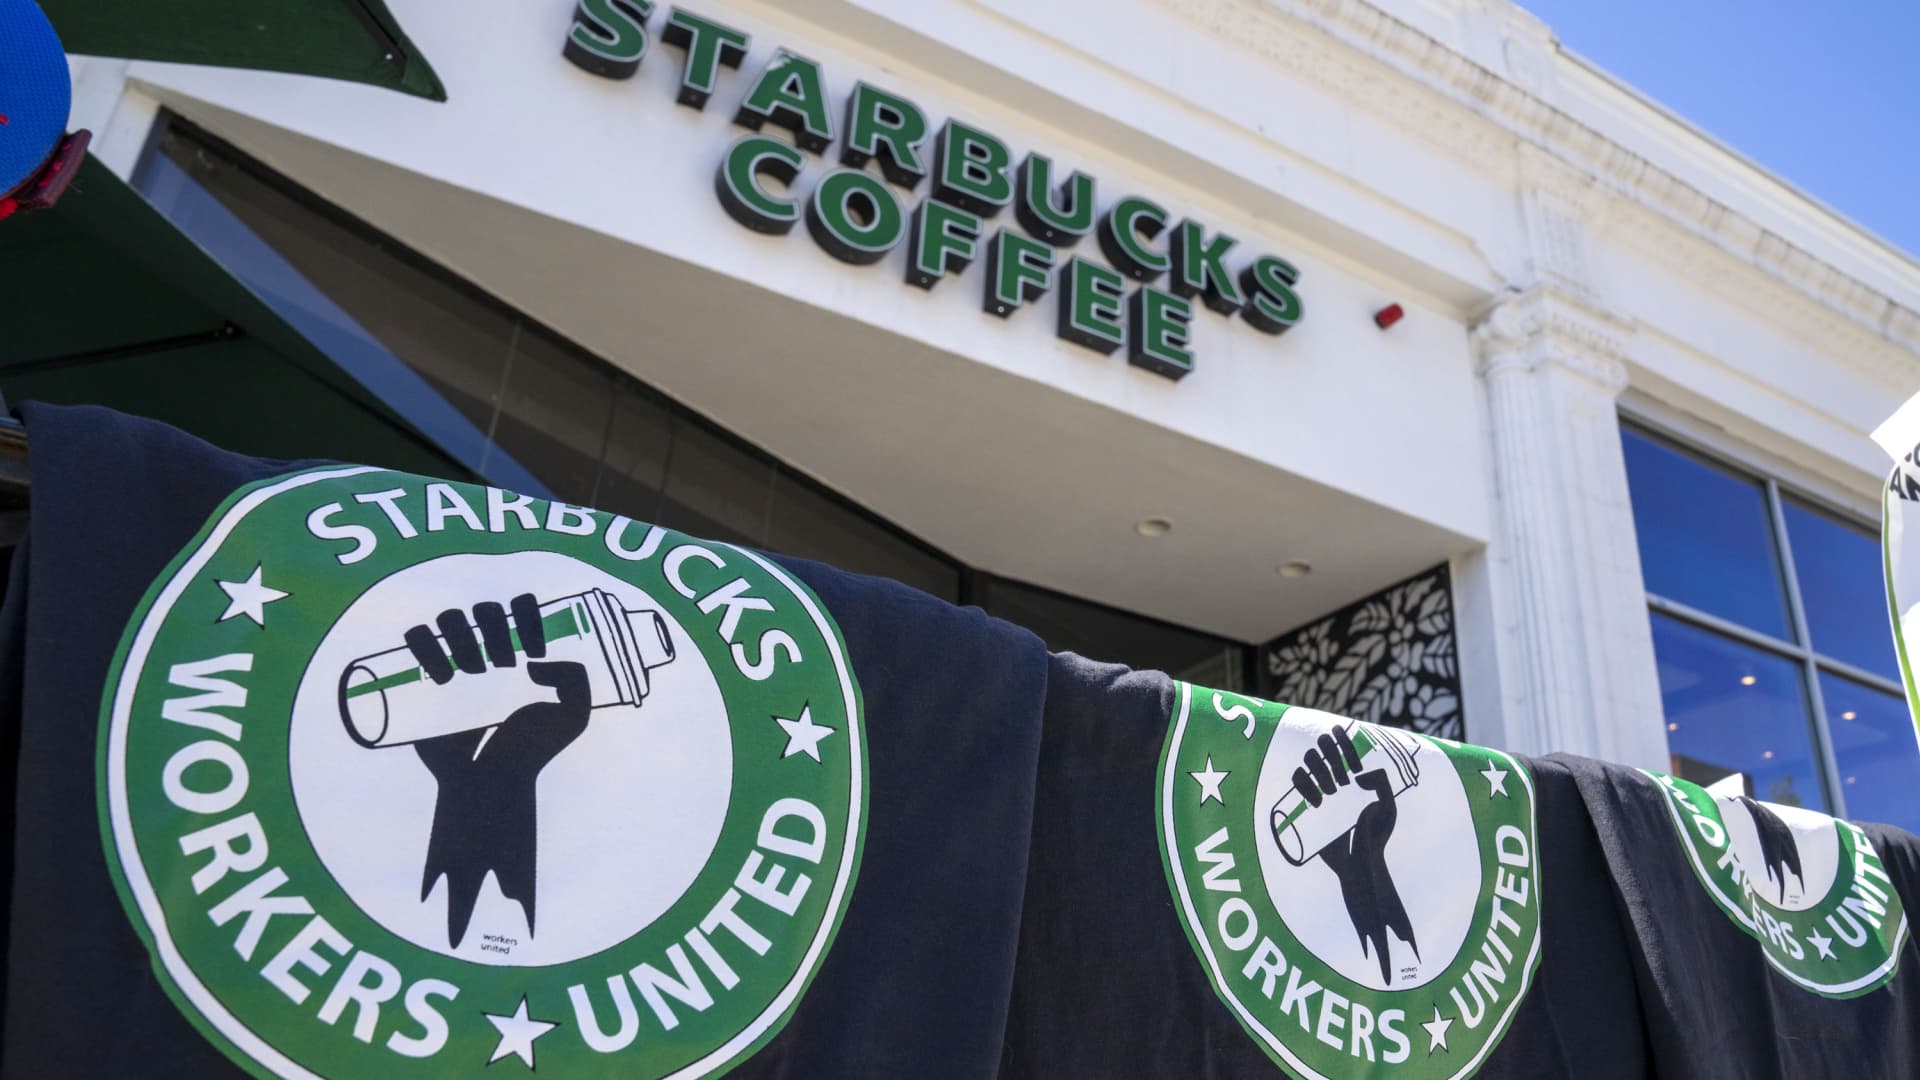 Starbucks union asks coffee giant to extend pay hikes, benefits to unionized stores